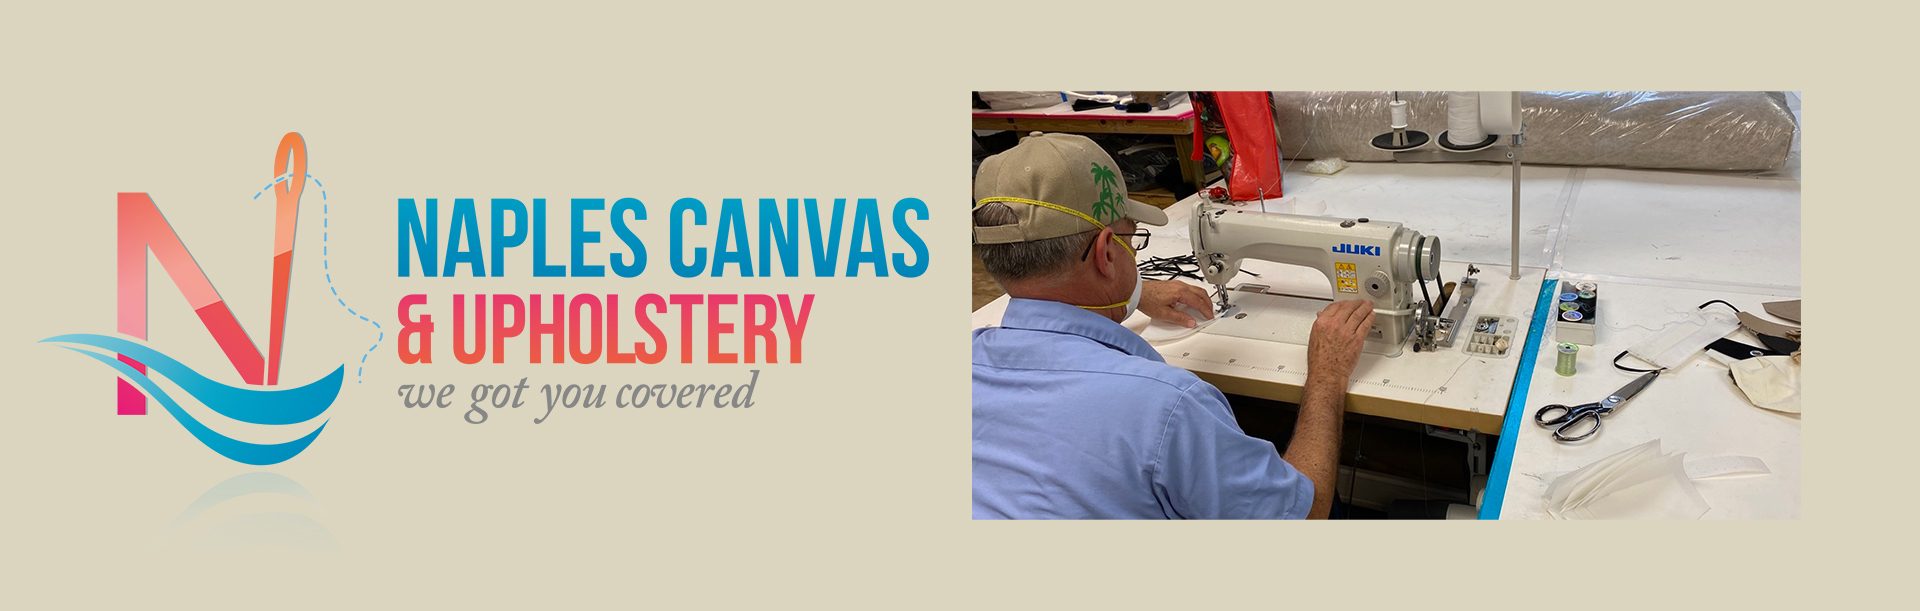 Contact Naples Canvas and Upholstery